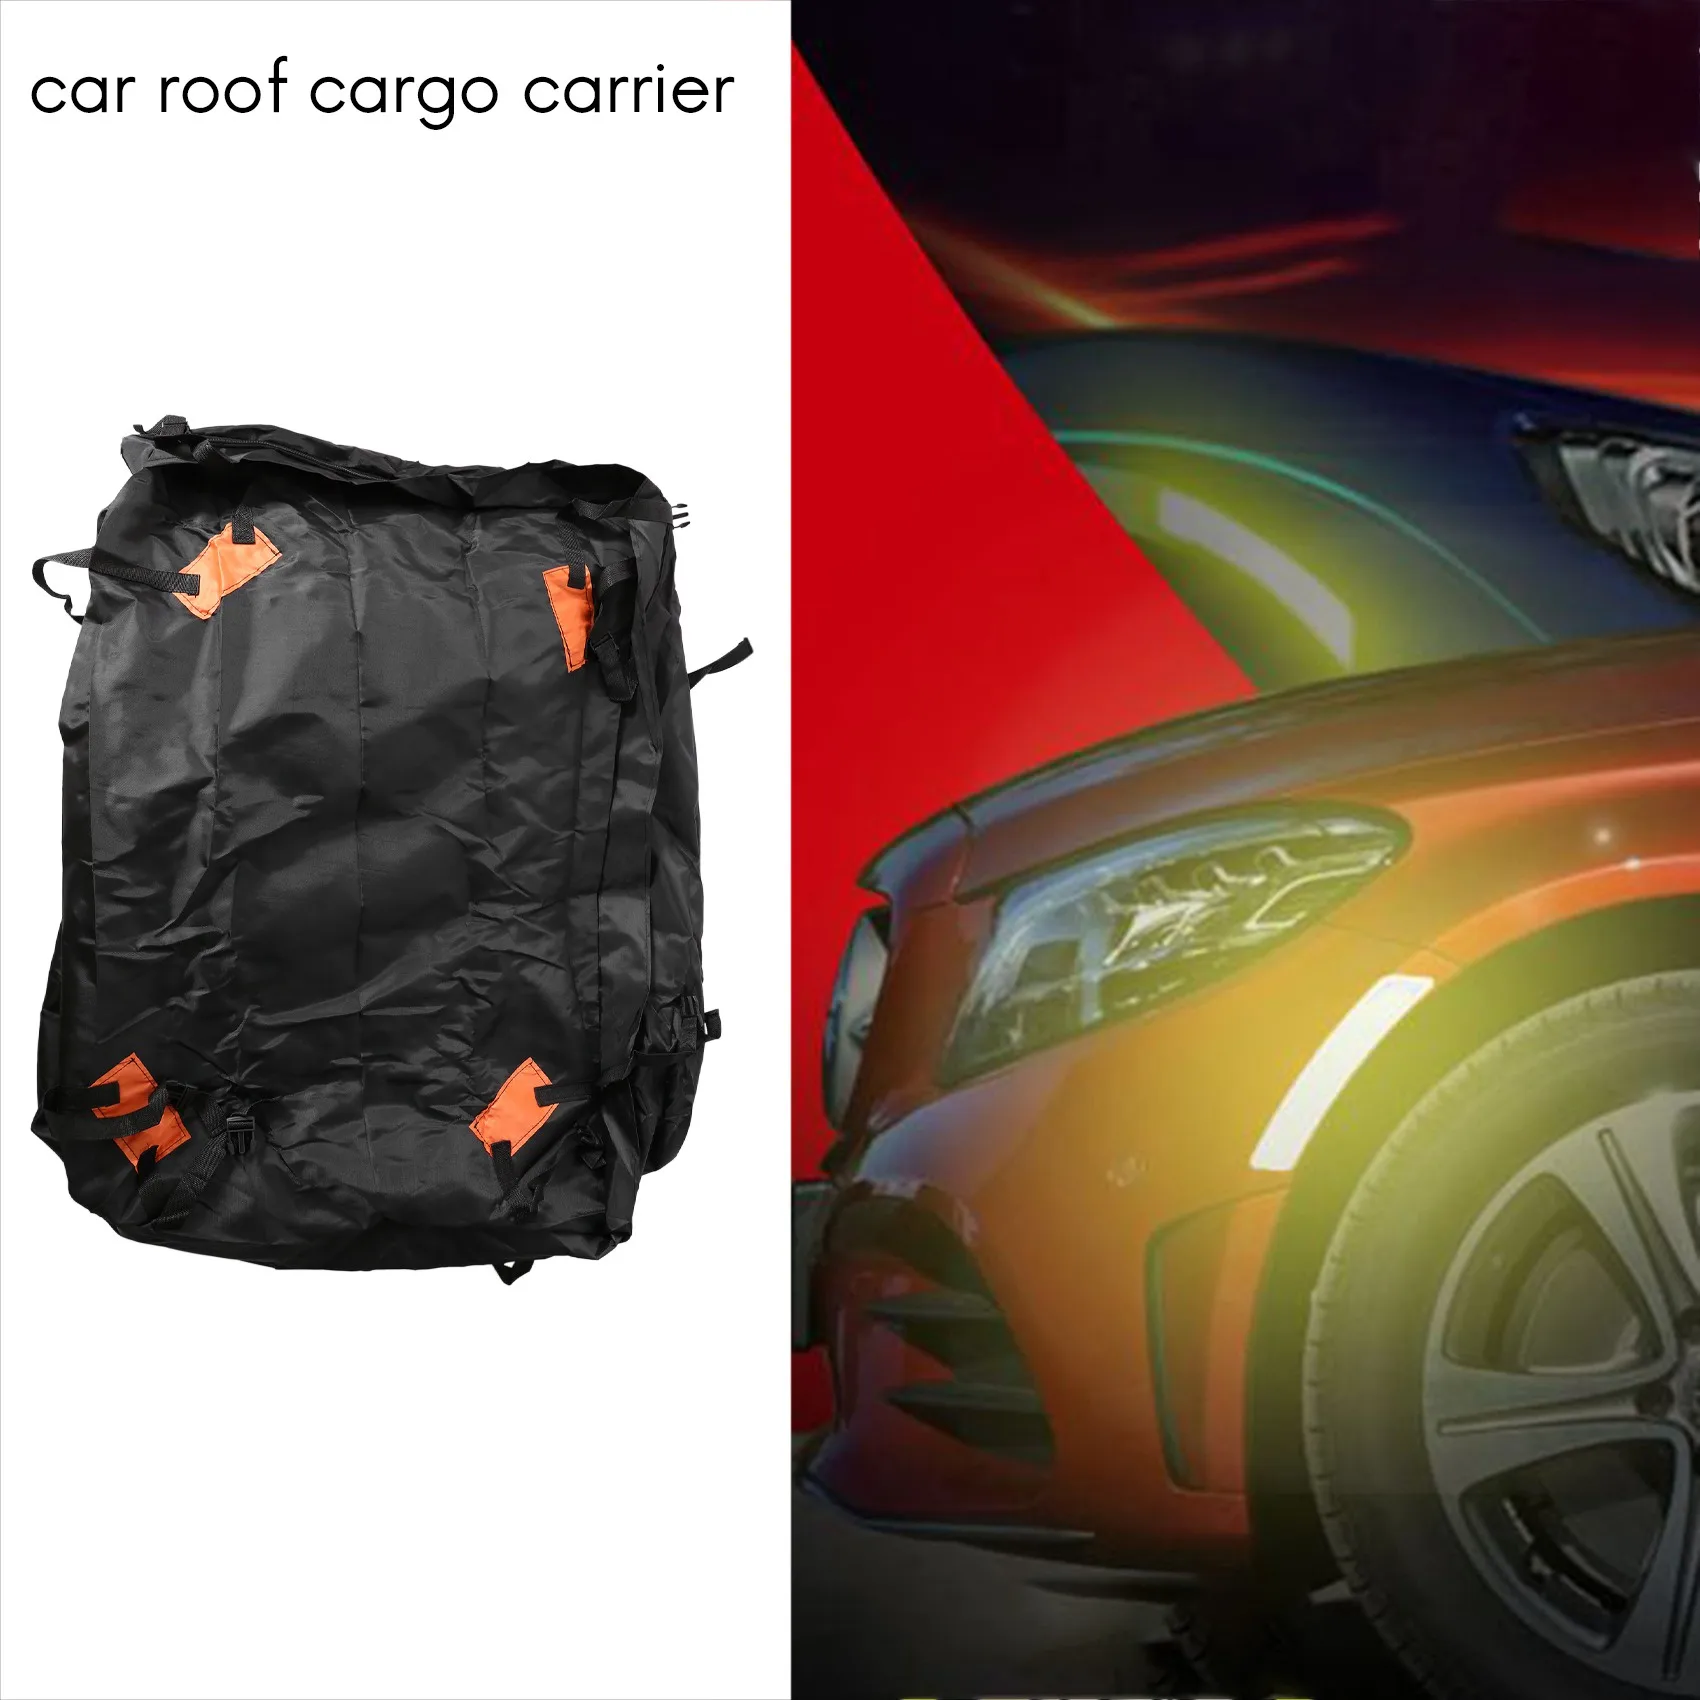 

Outdoor Waterproof Car Roof Top Rack Carrier Cargo Bag Car Rooftop Cargo Bag Travel Luggage Storage Cube Bag with Mat